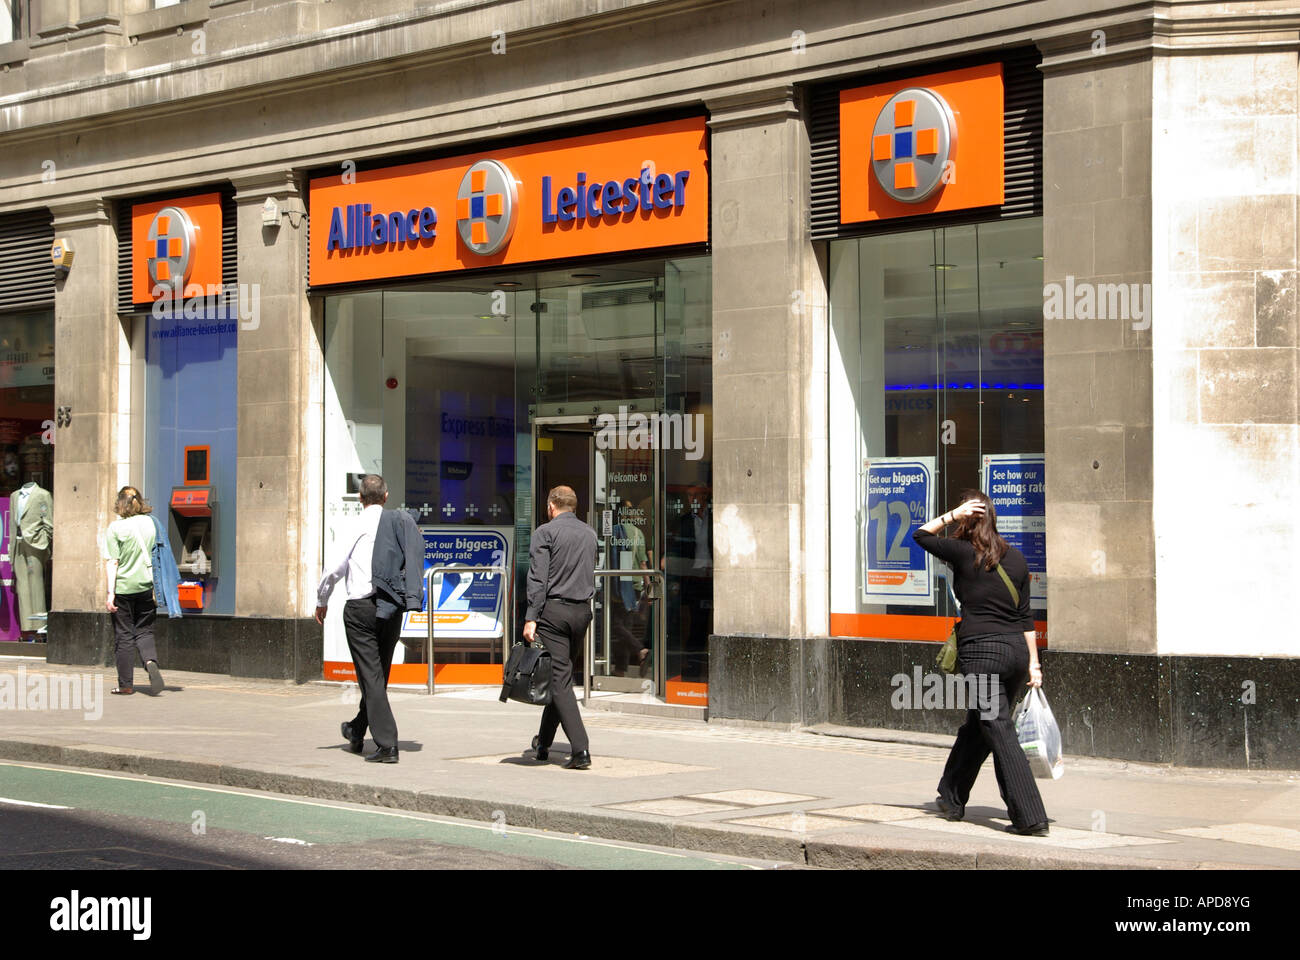 Alliance Leicester bank branch premises Cheapside City of London Stock Photo